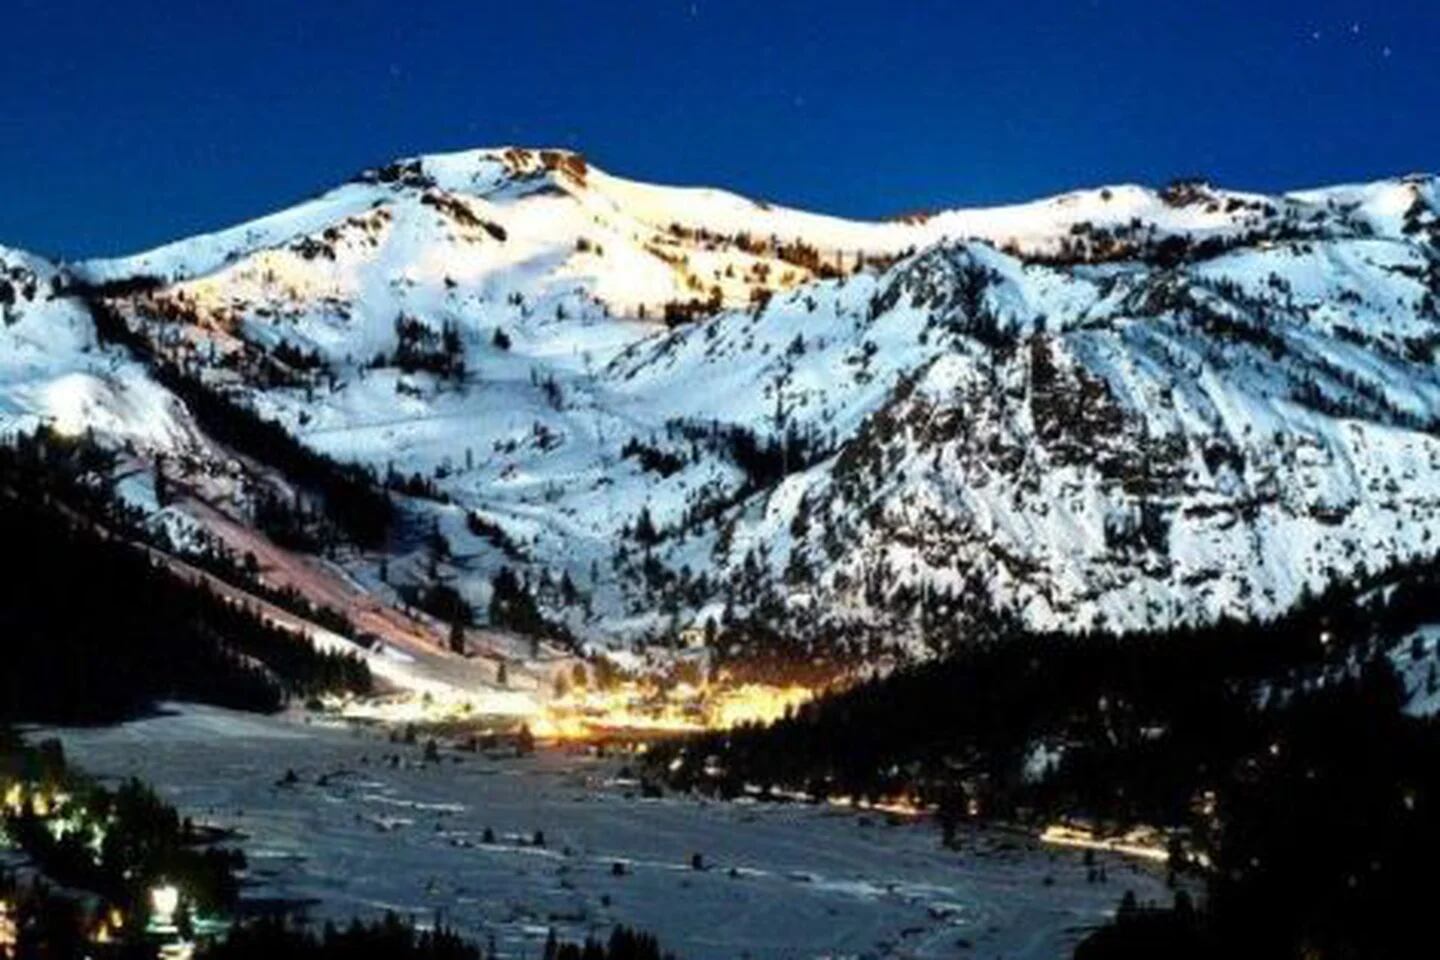 Olympic skiing venue Squaw Valley Resort changes its 'racist